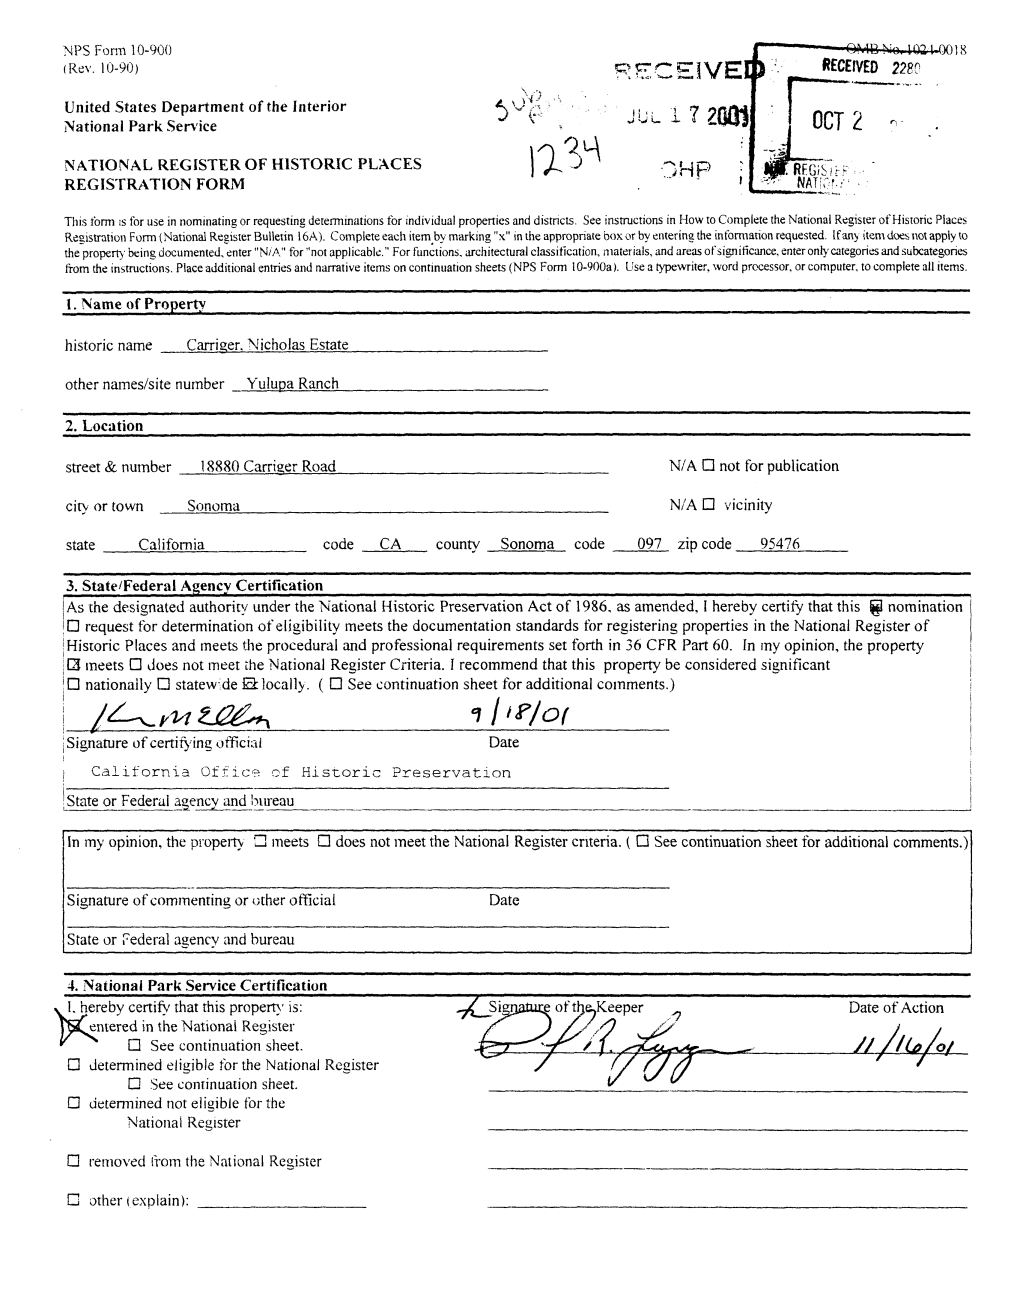 1 IP/Of I Signature of Certifying Official Date California Office of Historic Preservation State Or Federal Agency and Bureau